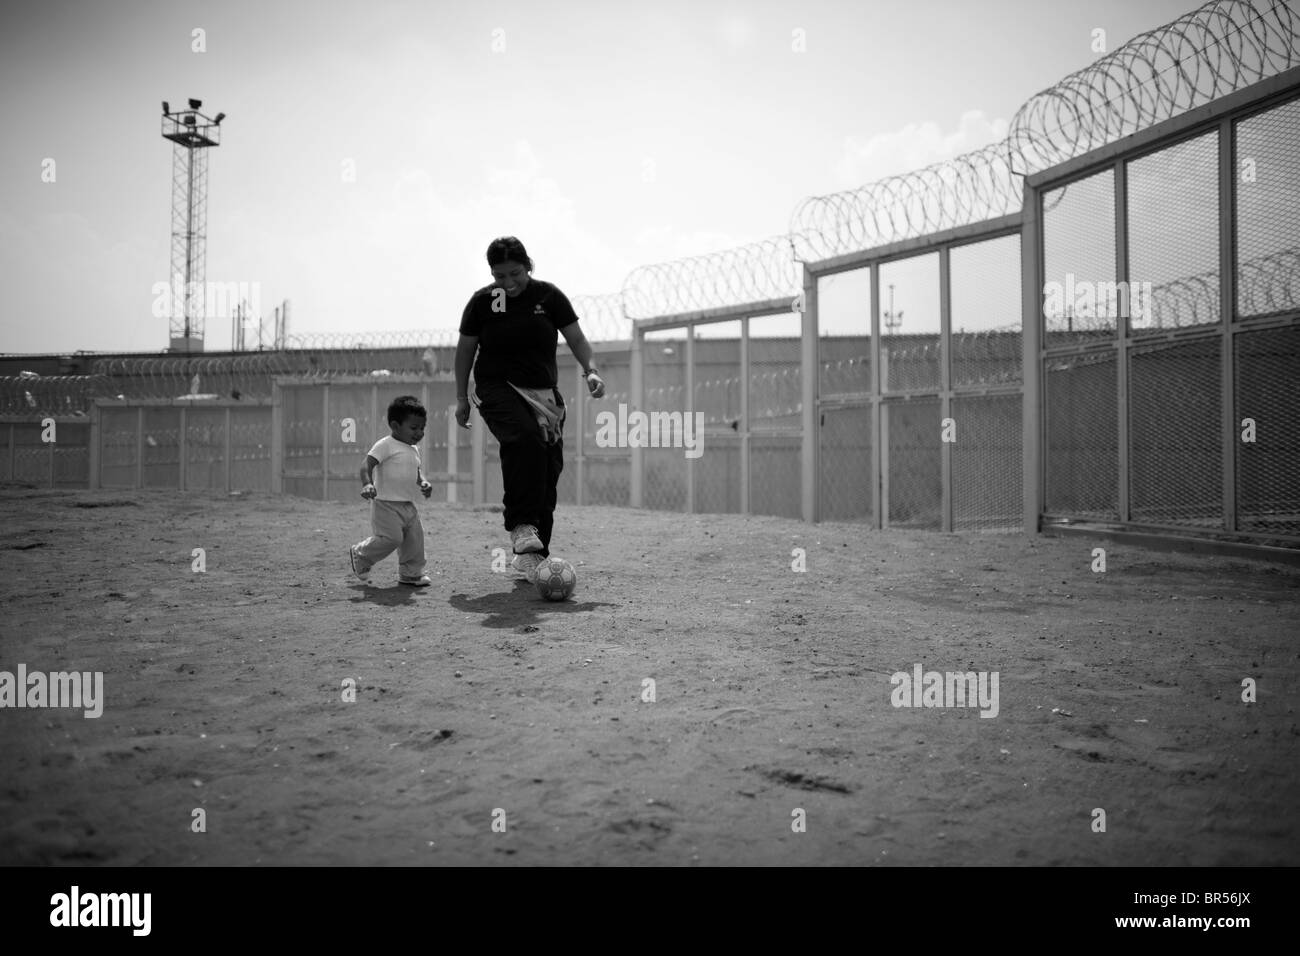 A prisoner plays soccer in a female penitentiary prison yard in Mexico D.F. Stock Photo